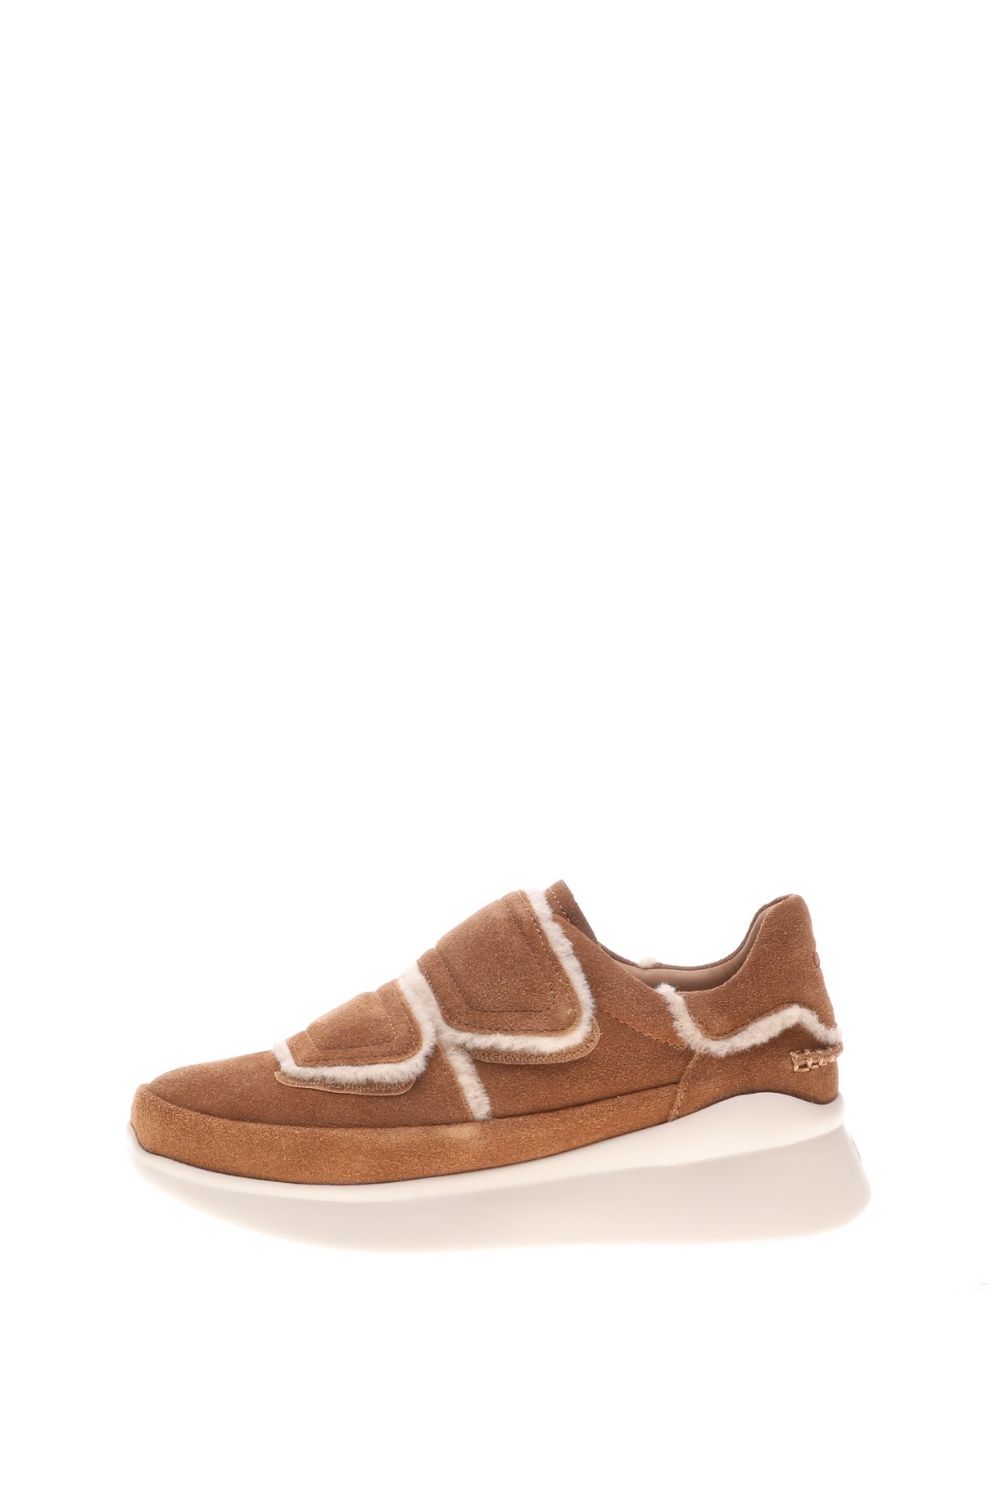 UGG - Γυναικεία sneakers UGG Ashby Spill Seam Sneaker καφέ Γυναικεία/Παπούτσια/Sneakers